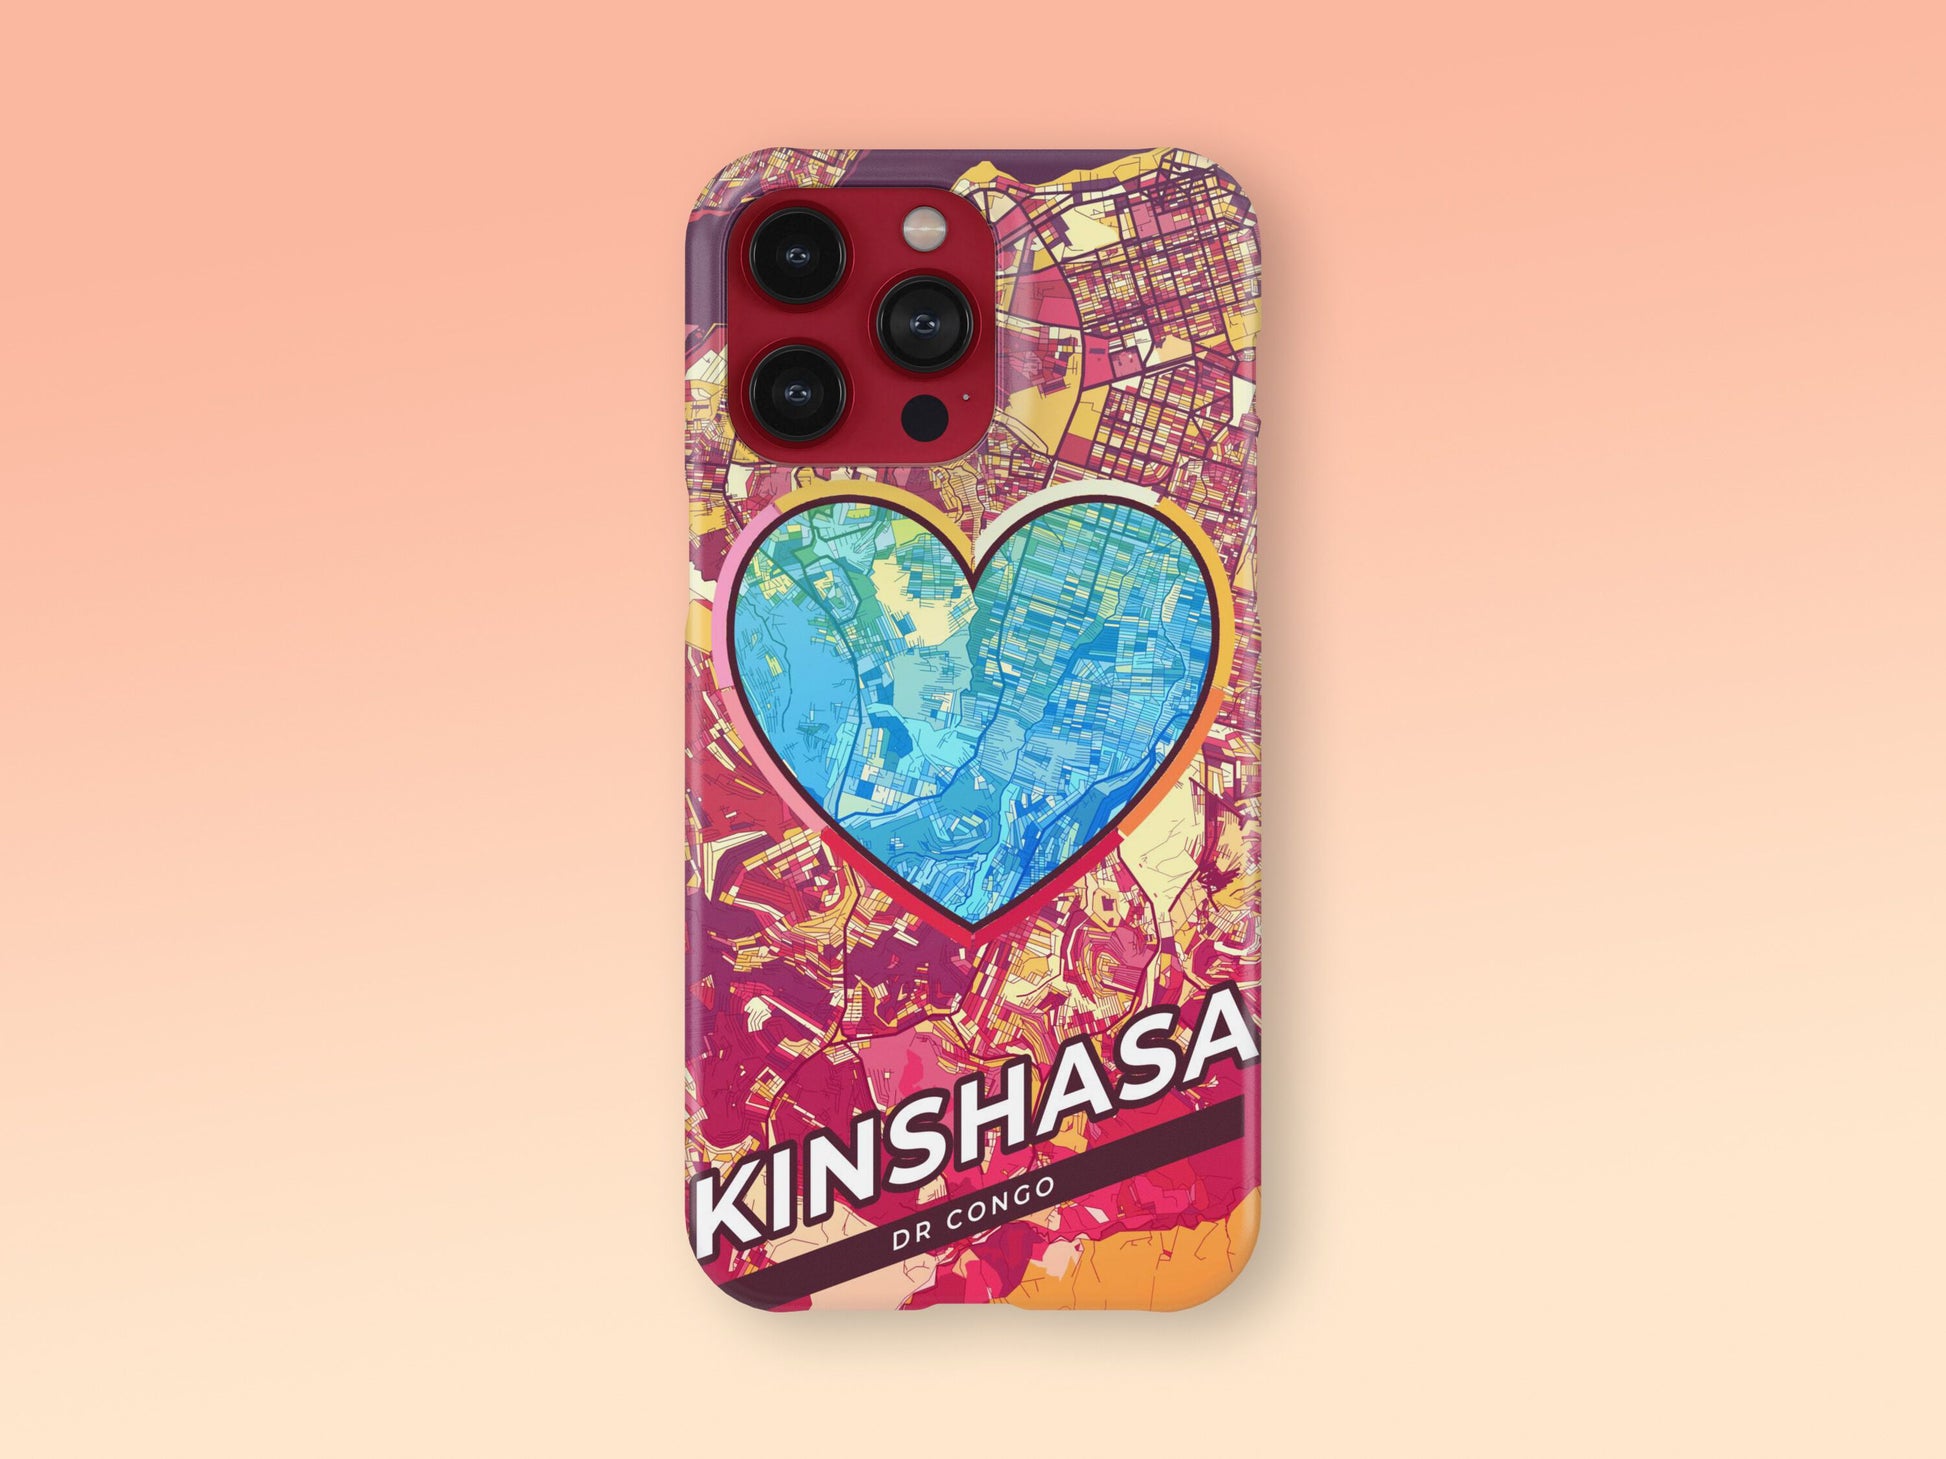 Kinshasa Dr Congo slim phone case with colorful icon. Birthday, wedding or housewarming gift. Couple match cases. 2